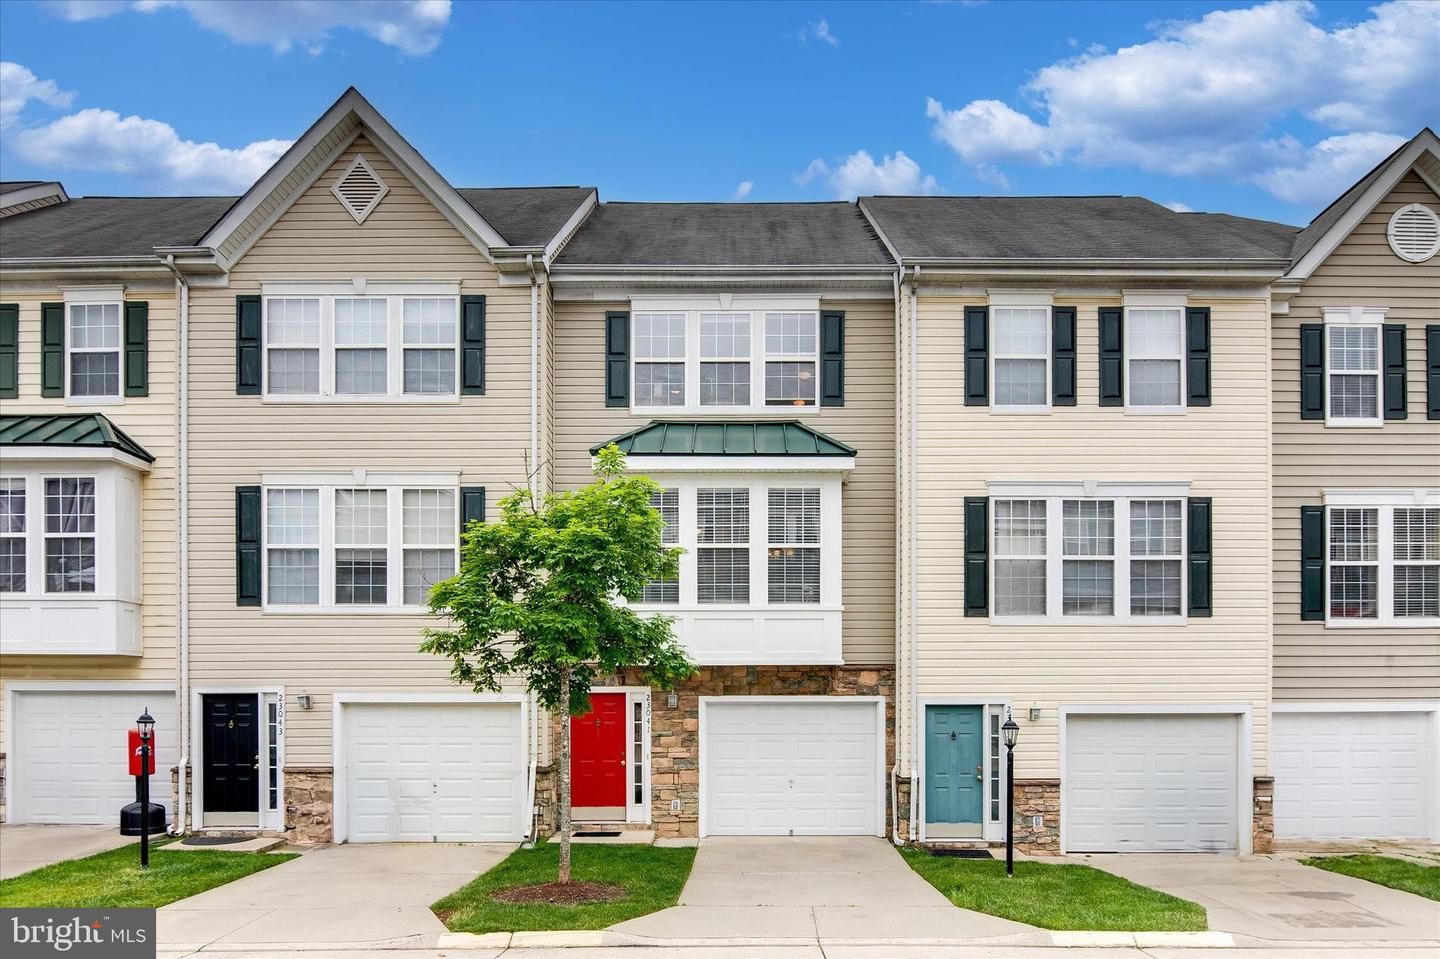 View Sterling, VA 20166 townhome